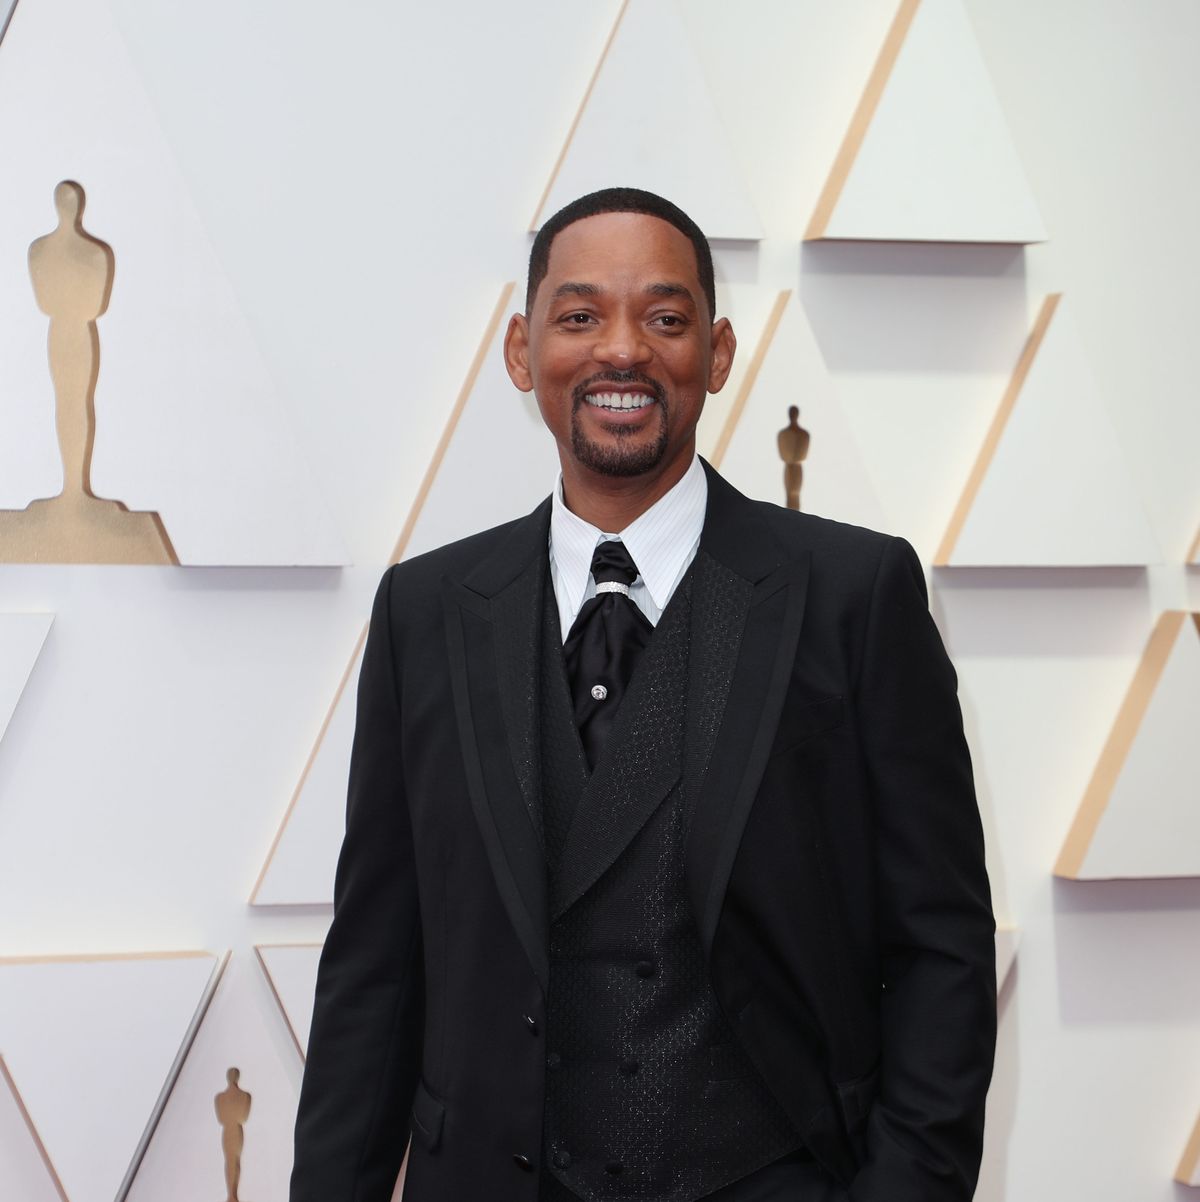 Will Smith & Timothee Chalamet 2022 Oscars Red Carpet Looks in Photos